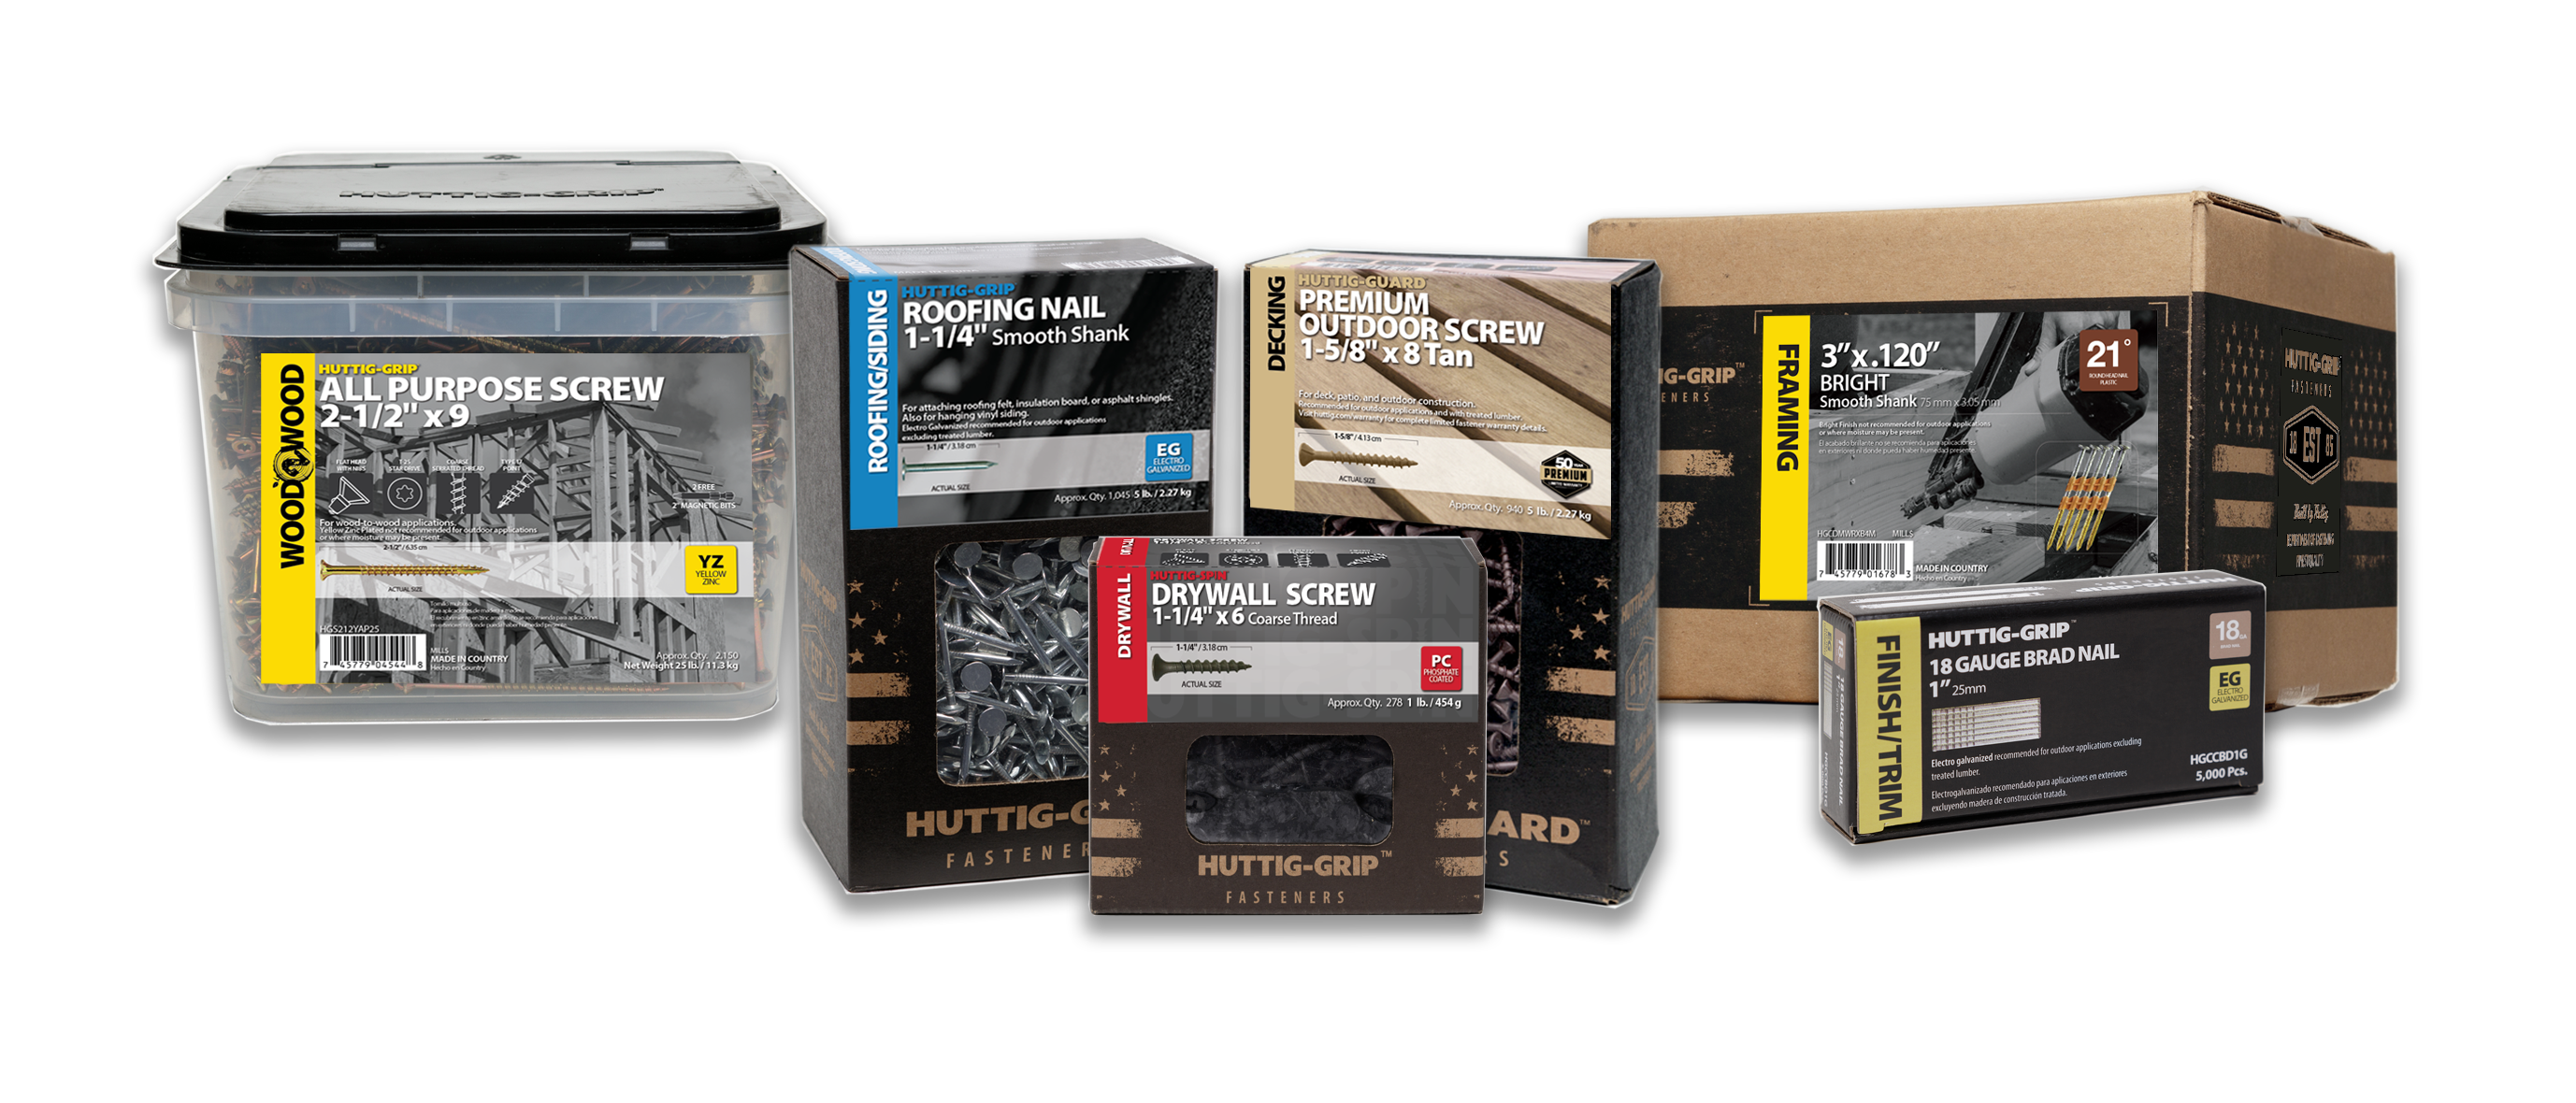 Huttig-Grip Fasteners: Now A Part of Woodgrain's Family of Brands